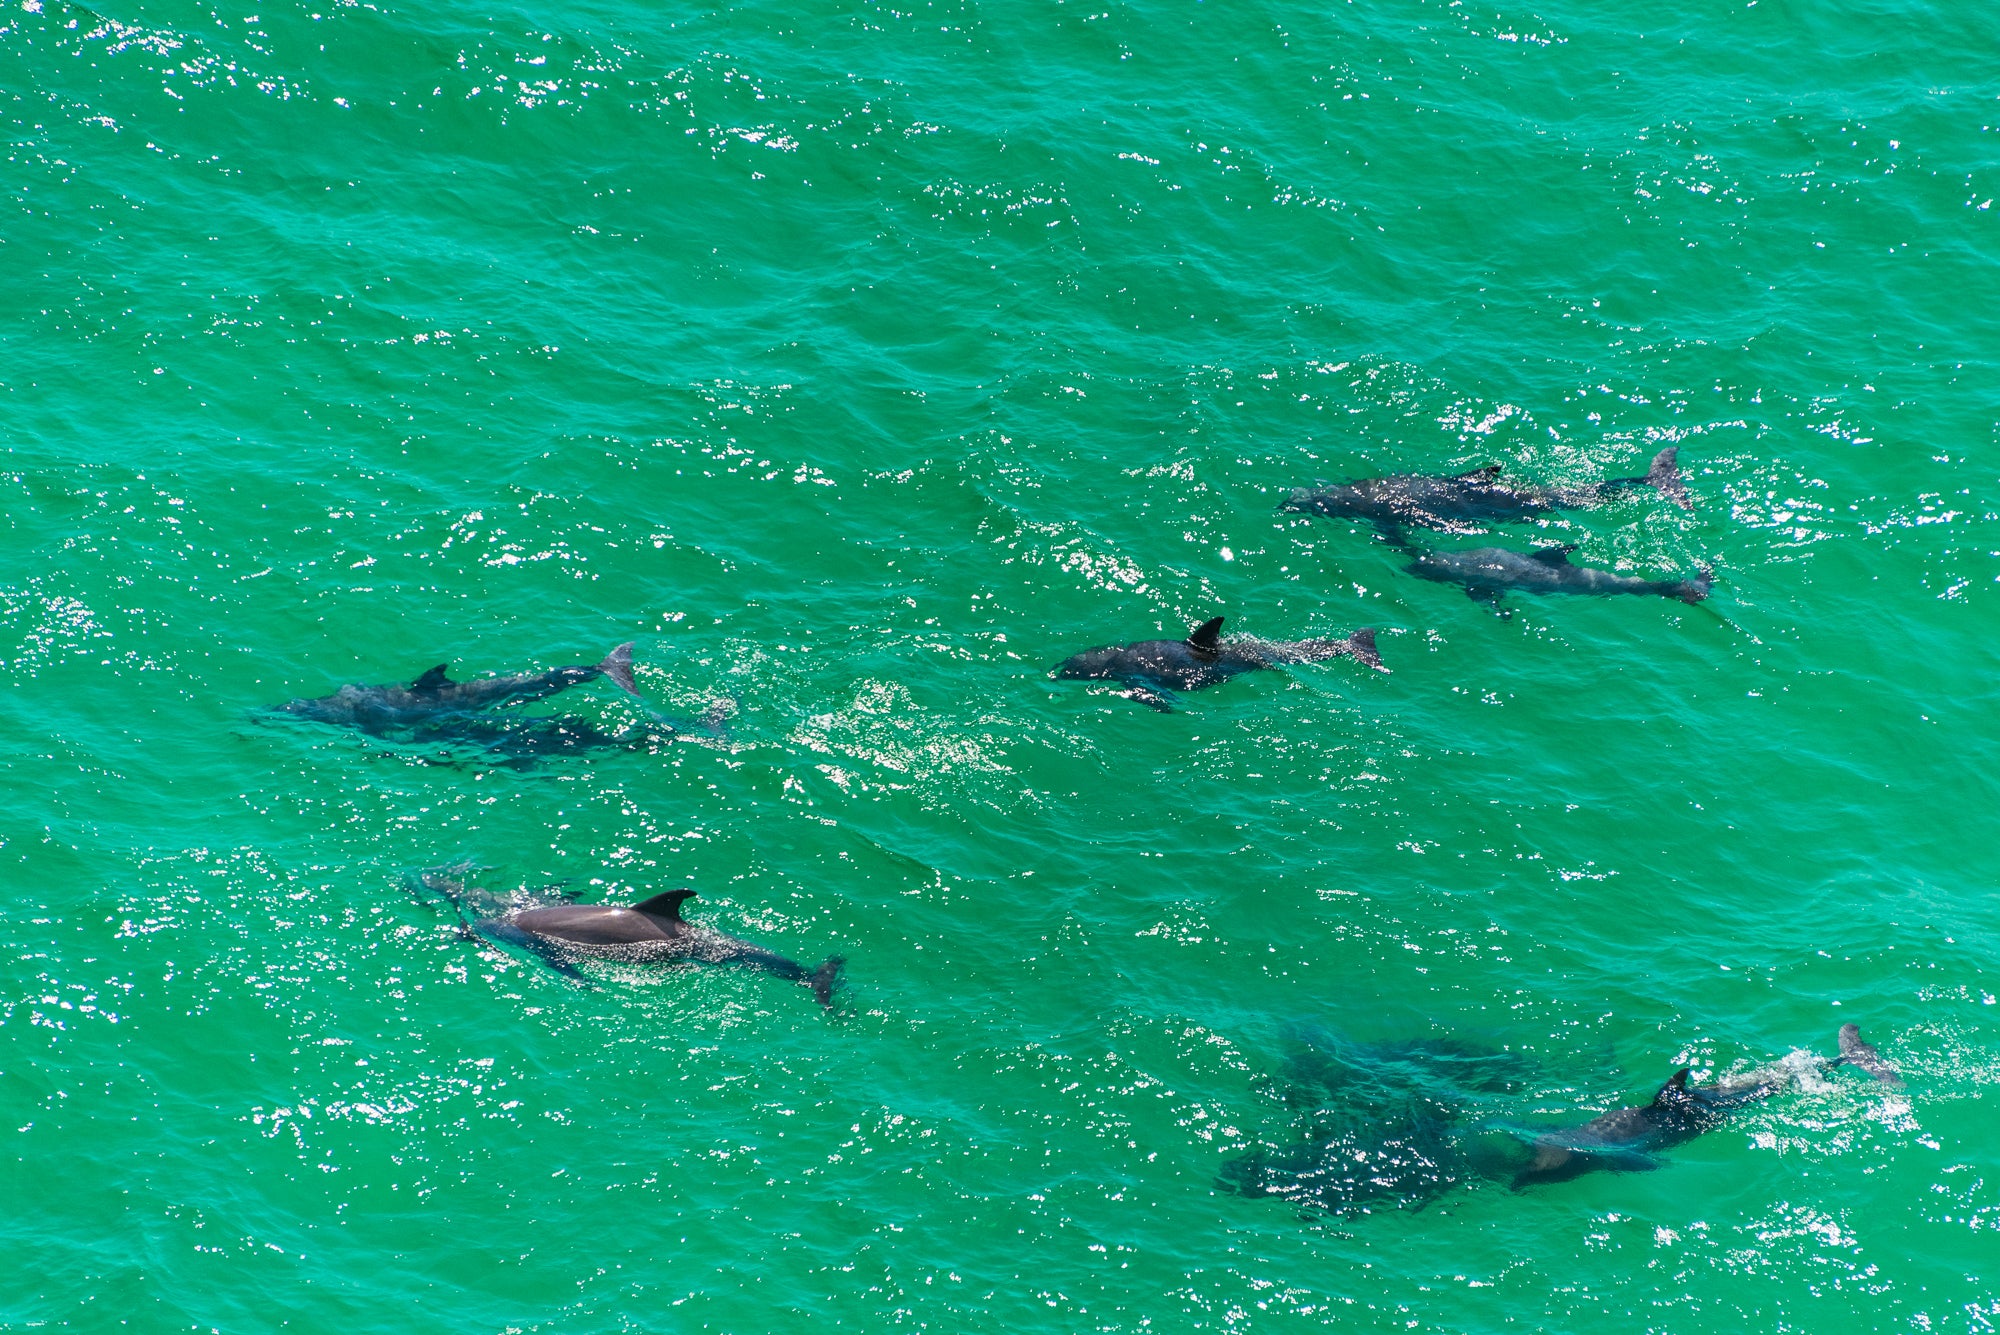 Dolphins+at+play+in+the+Gulf+Waters